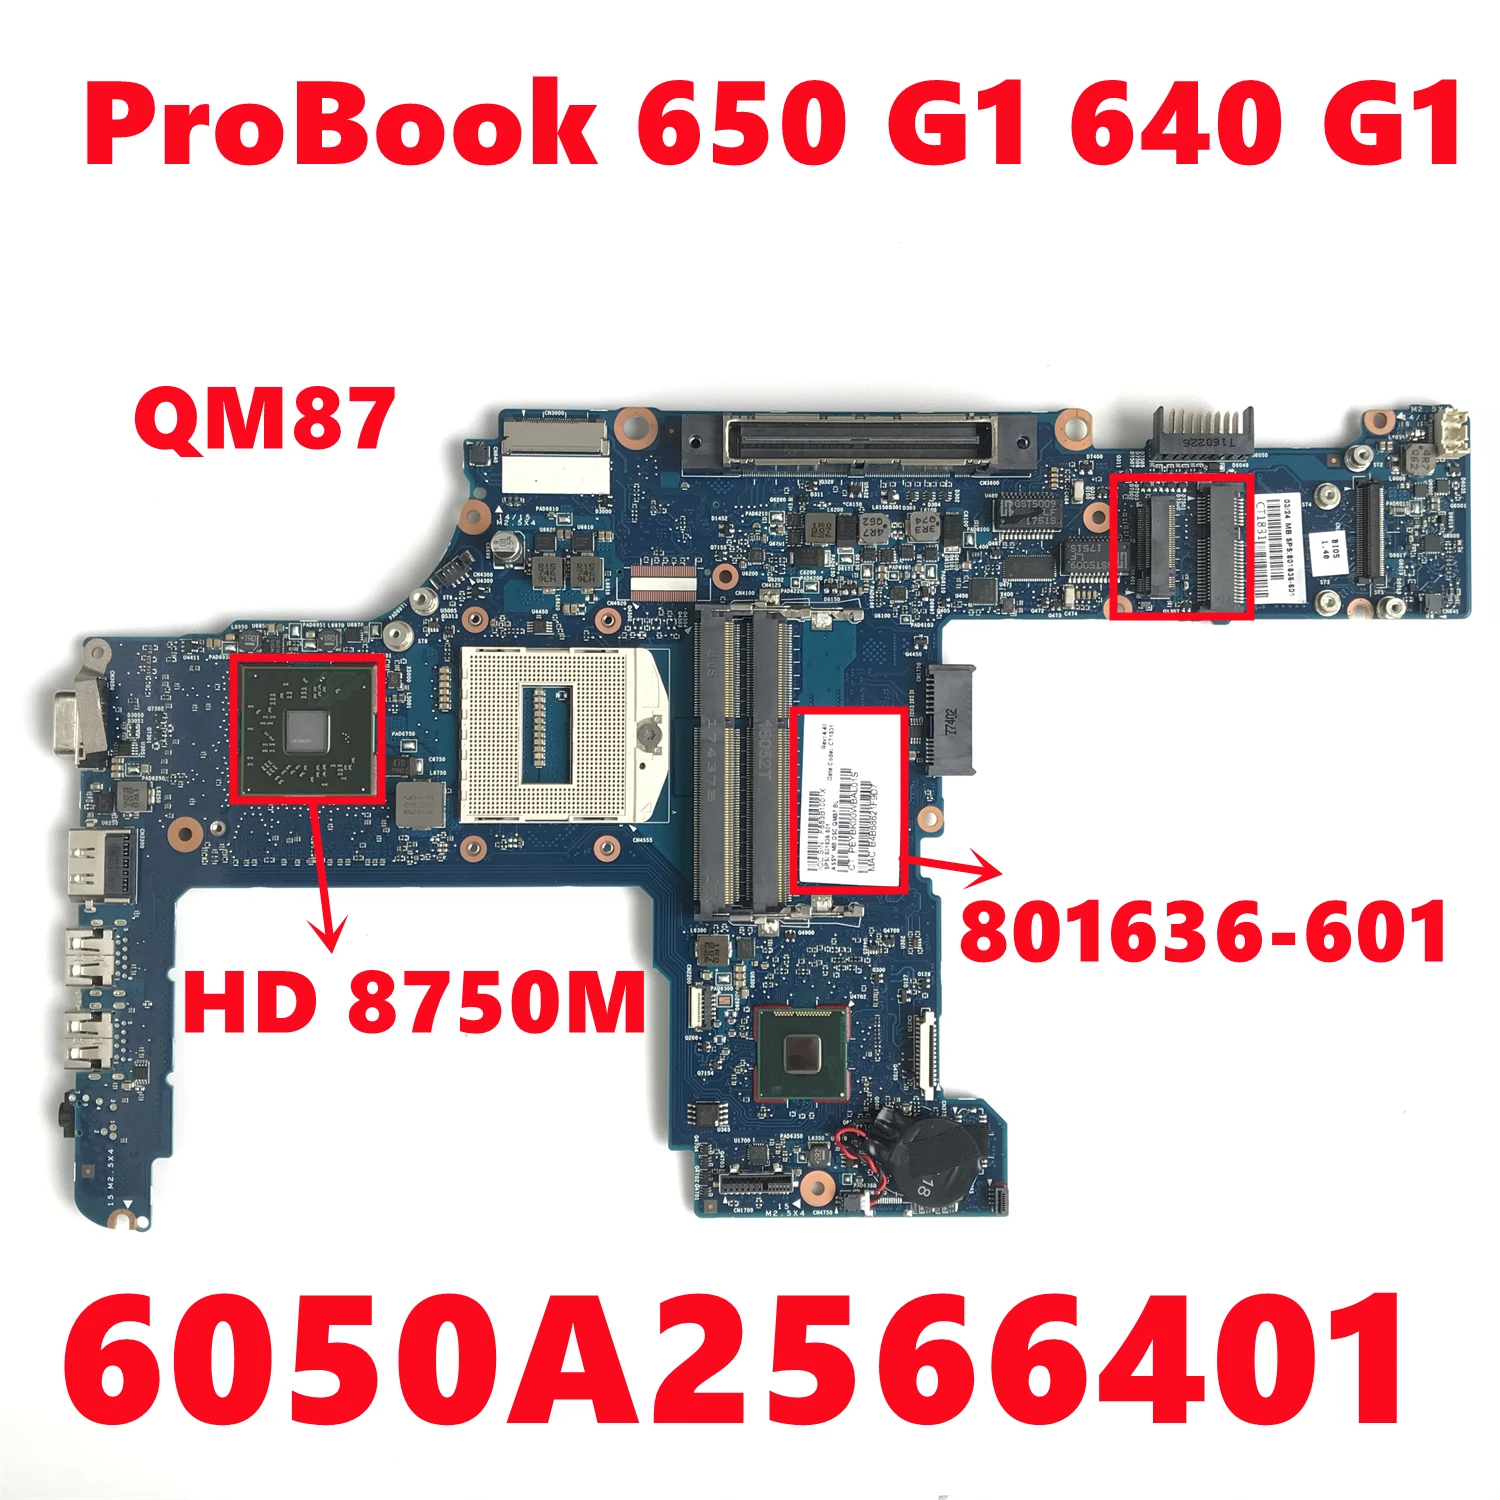 

801636-601 801636-501 801636-001 For HP ProBook 650 G1 640 G1 Laptop Motherboard 6050A2566401 With 216-0842121 QM87 100% Test OK